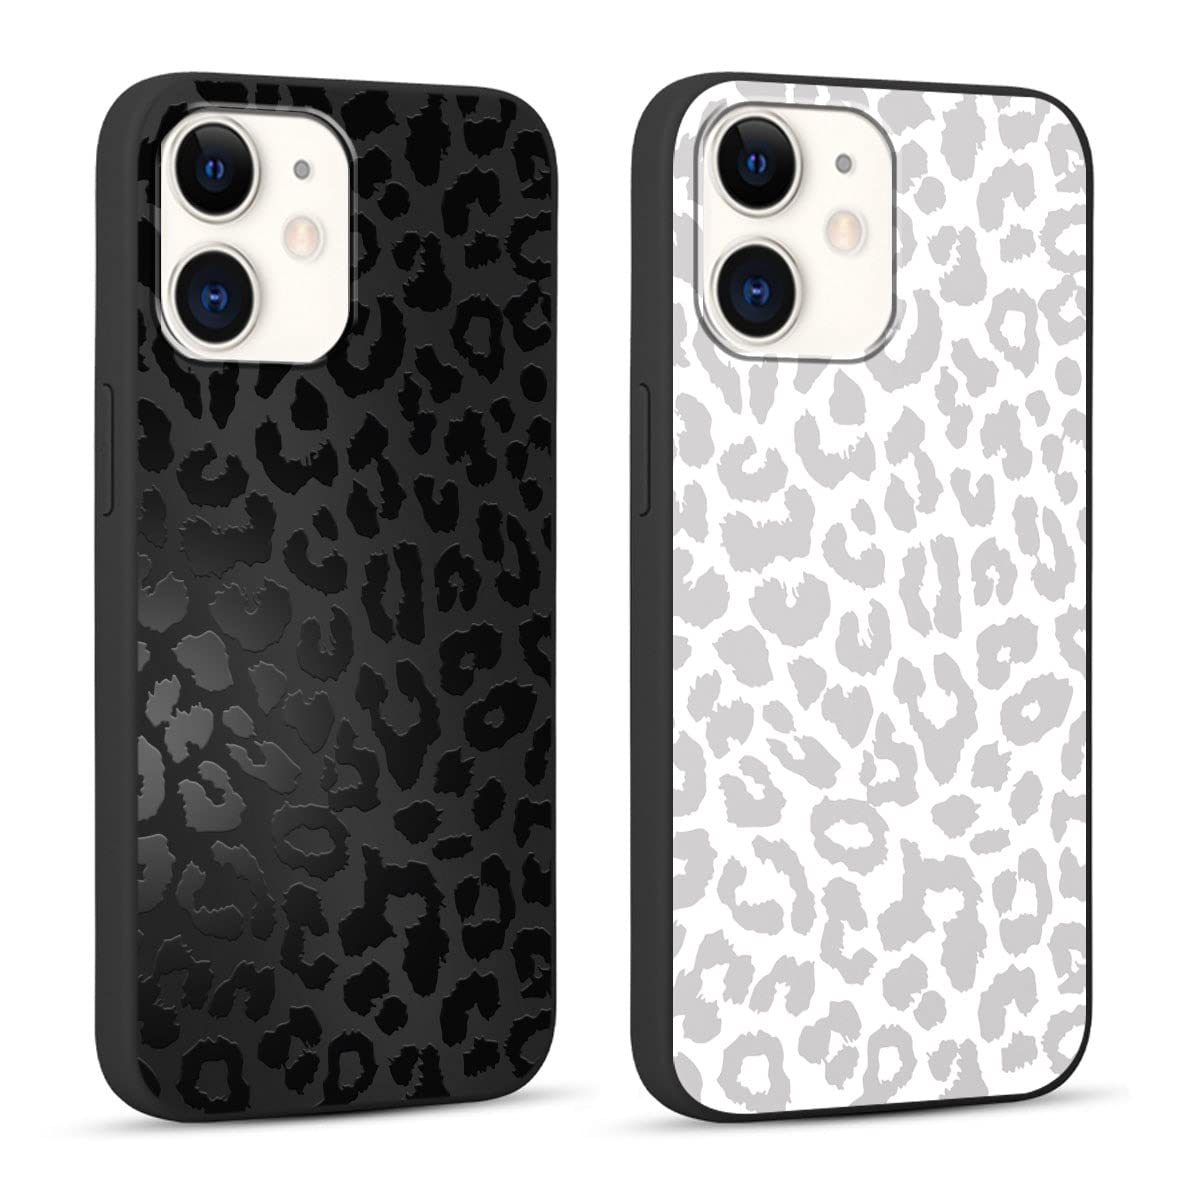 RUMDEY 2 Pack Cute Cheetah Print for Apple iPhone 11 6.1 Inch Phone Case,Luxury Leopard Pattern Design Cases Soft Silicone Slim TPU Shockproof Protective Bumper Cover for Women Girls-Black & White